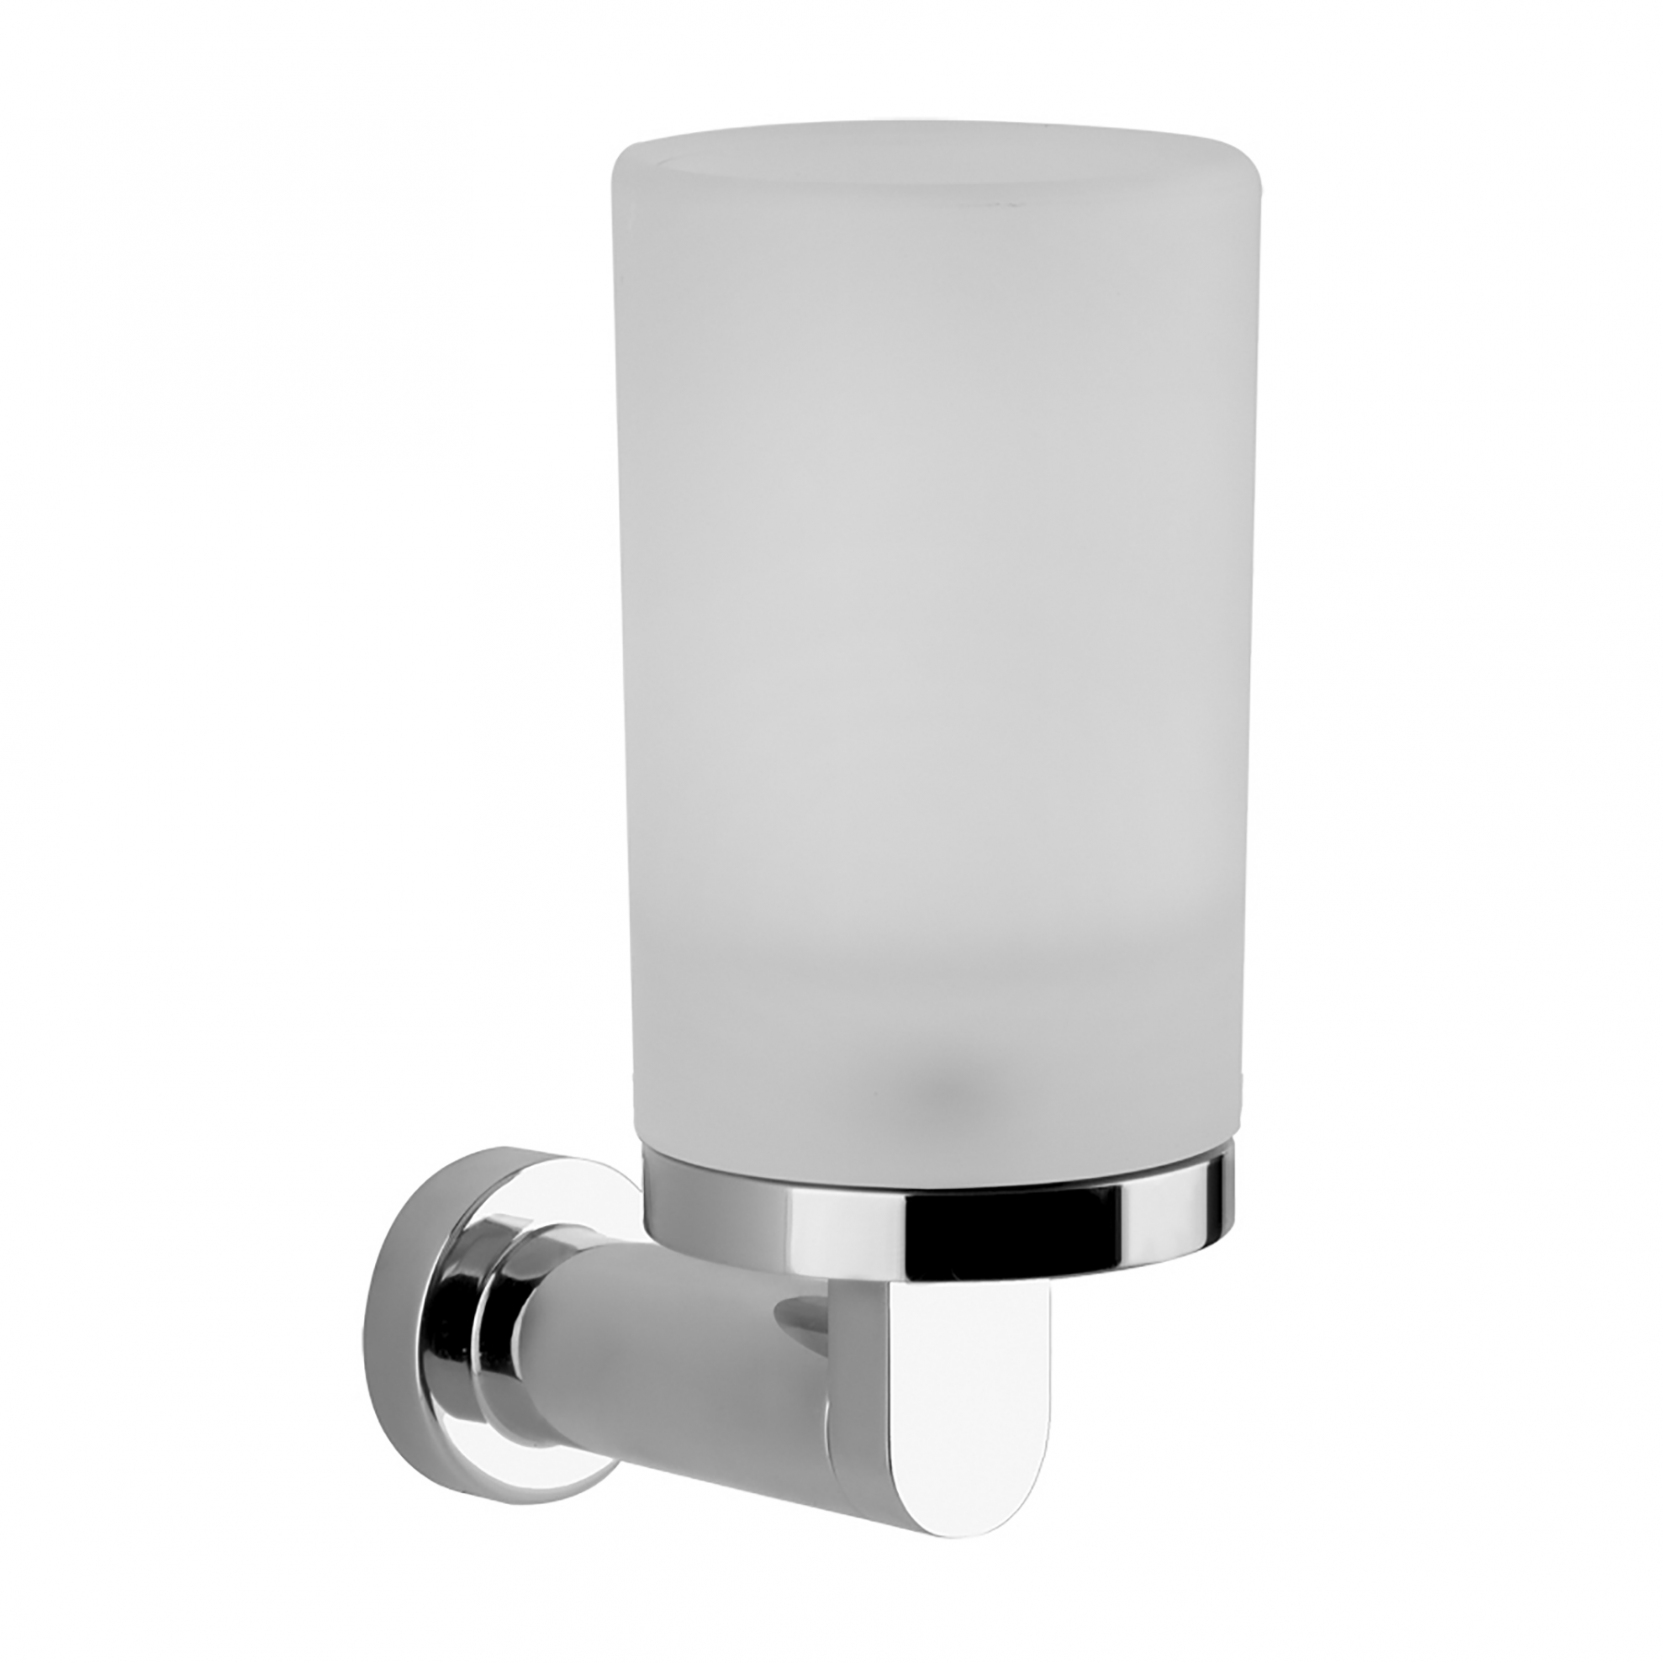 Gessi Emporio wall-mounted tumbler holder GESSI CHROME 031